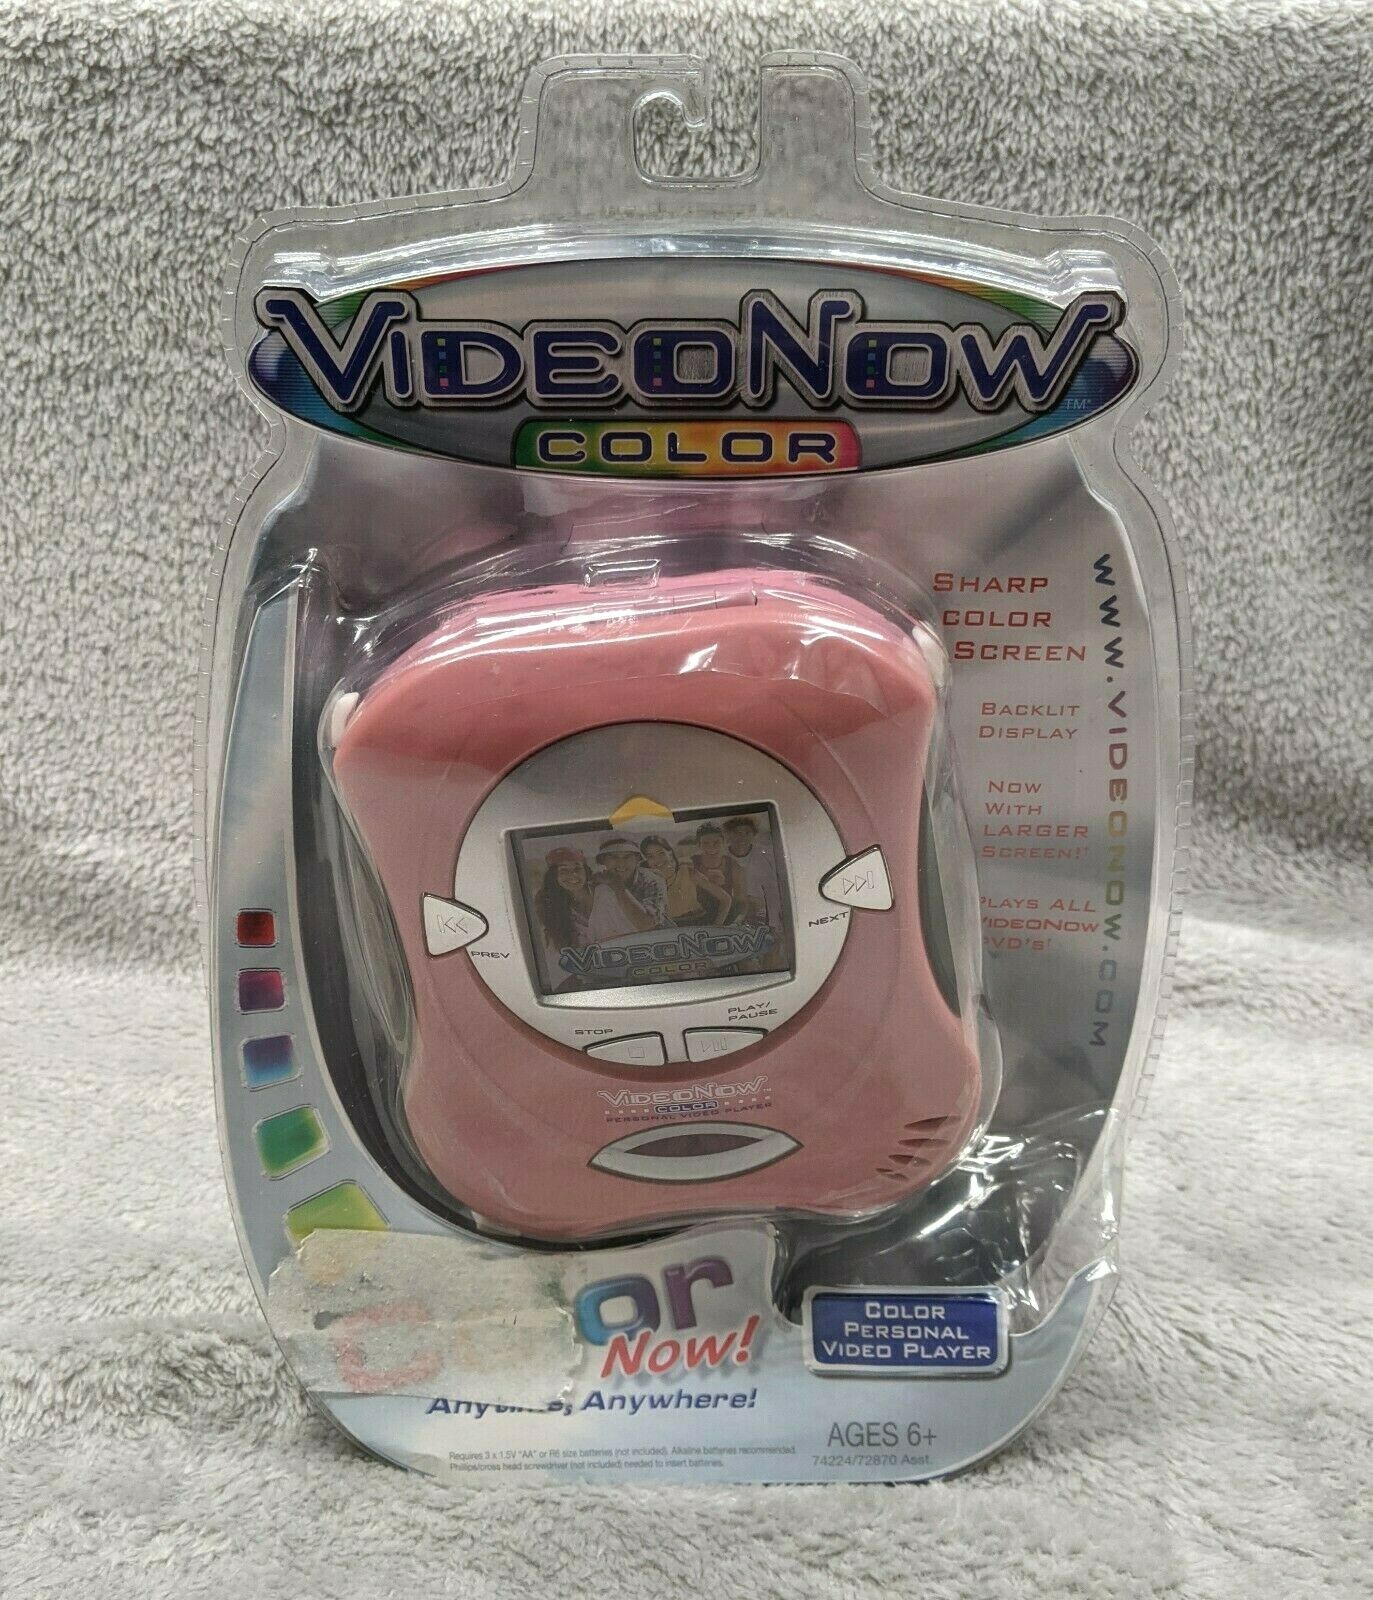 Video Now Color Personal Video Player Pink New Sealed